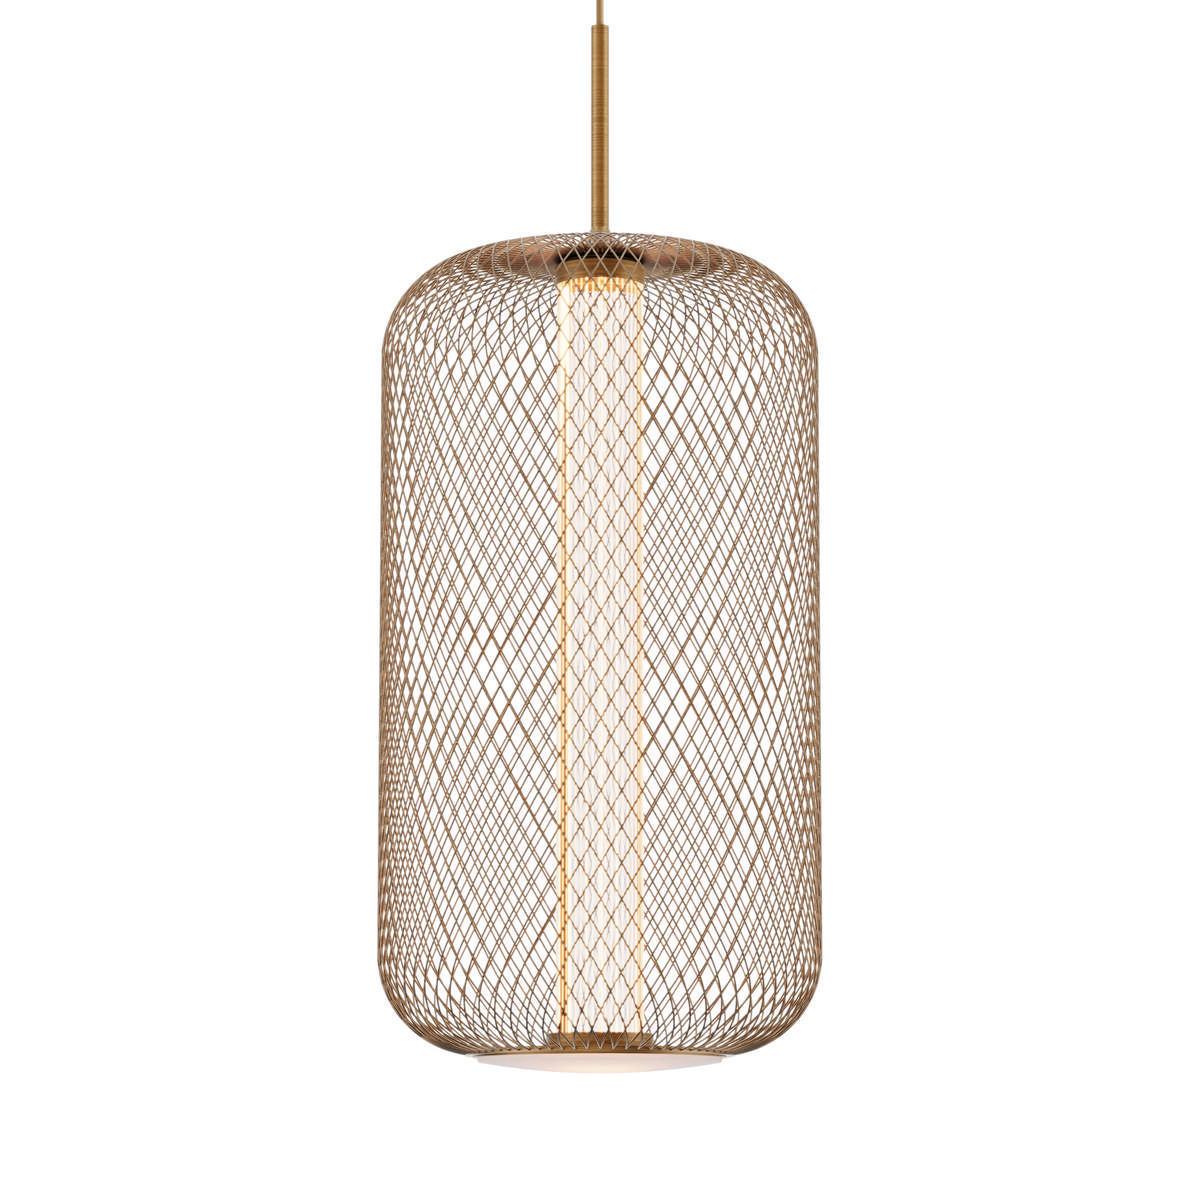 By Eve Eve Garza Tube Hanglamp Collectie